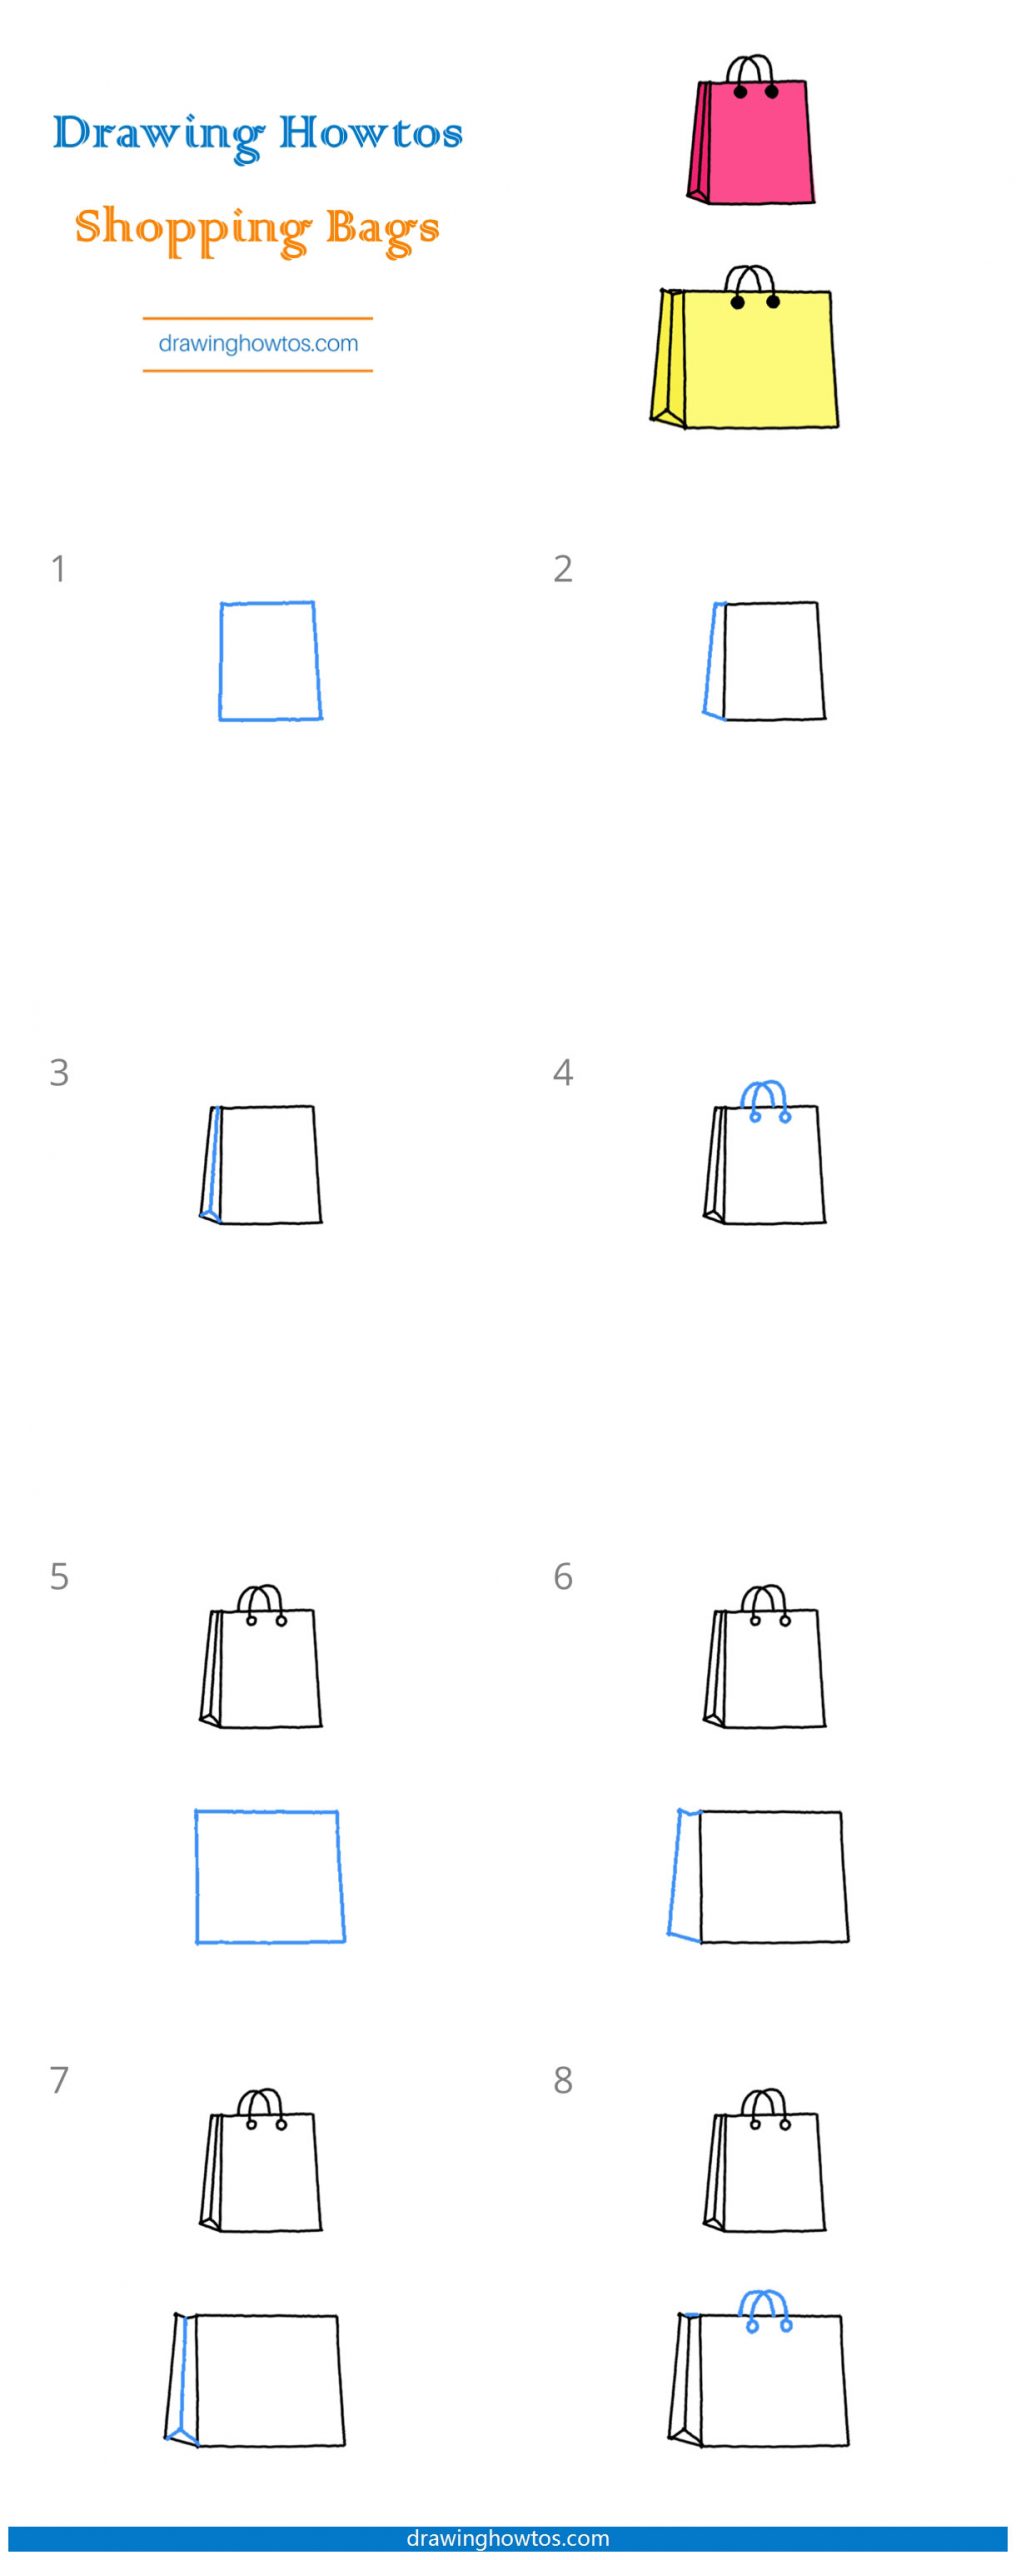 How to Draw Shopping Bags Step by Step